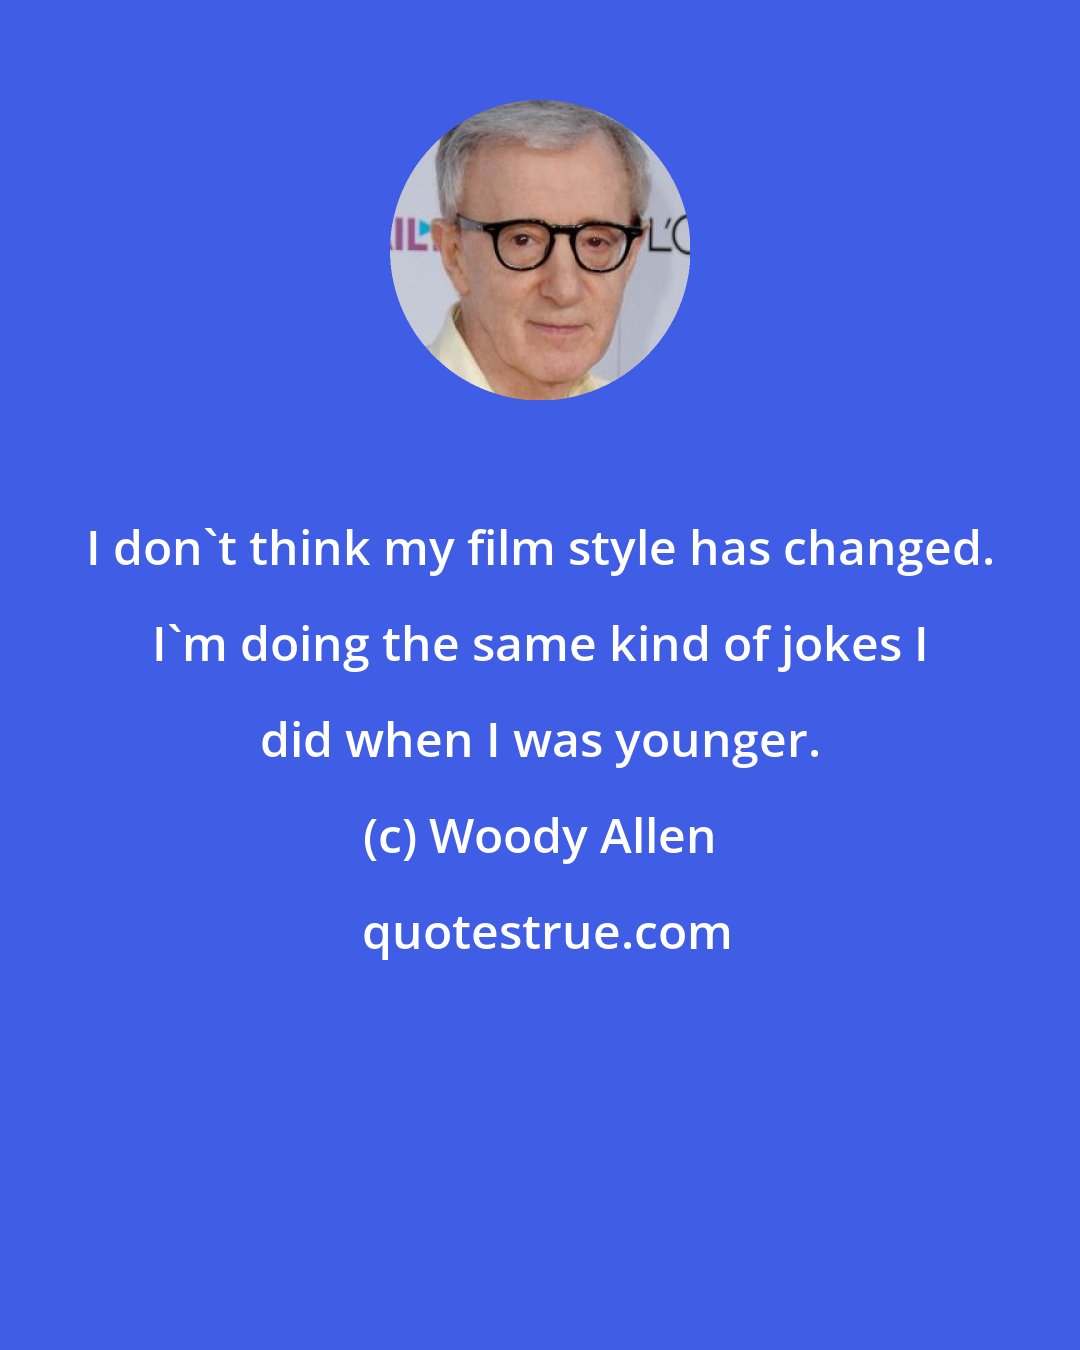 Woody Allen: I don't think my film style has changed. I'm doing the same kind of jokes I did when I was younger.